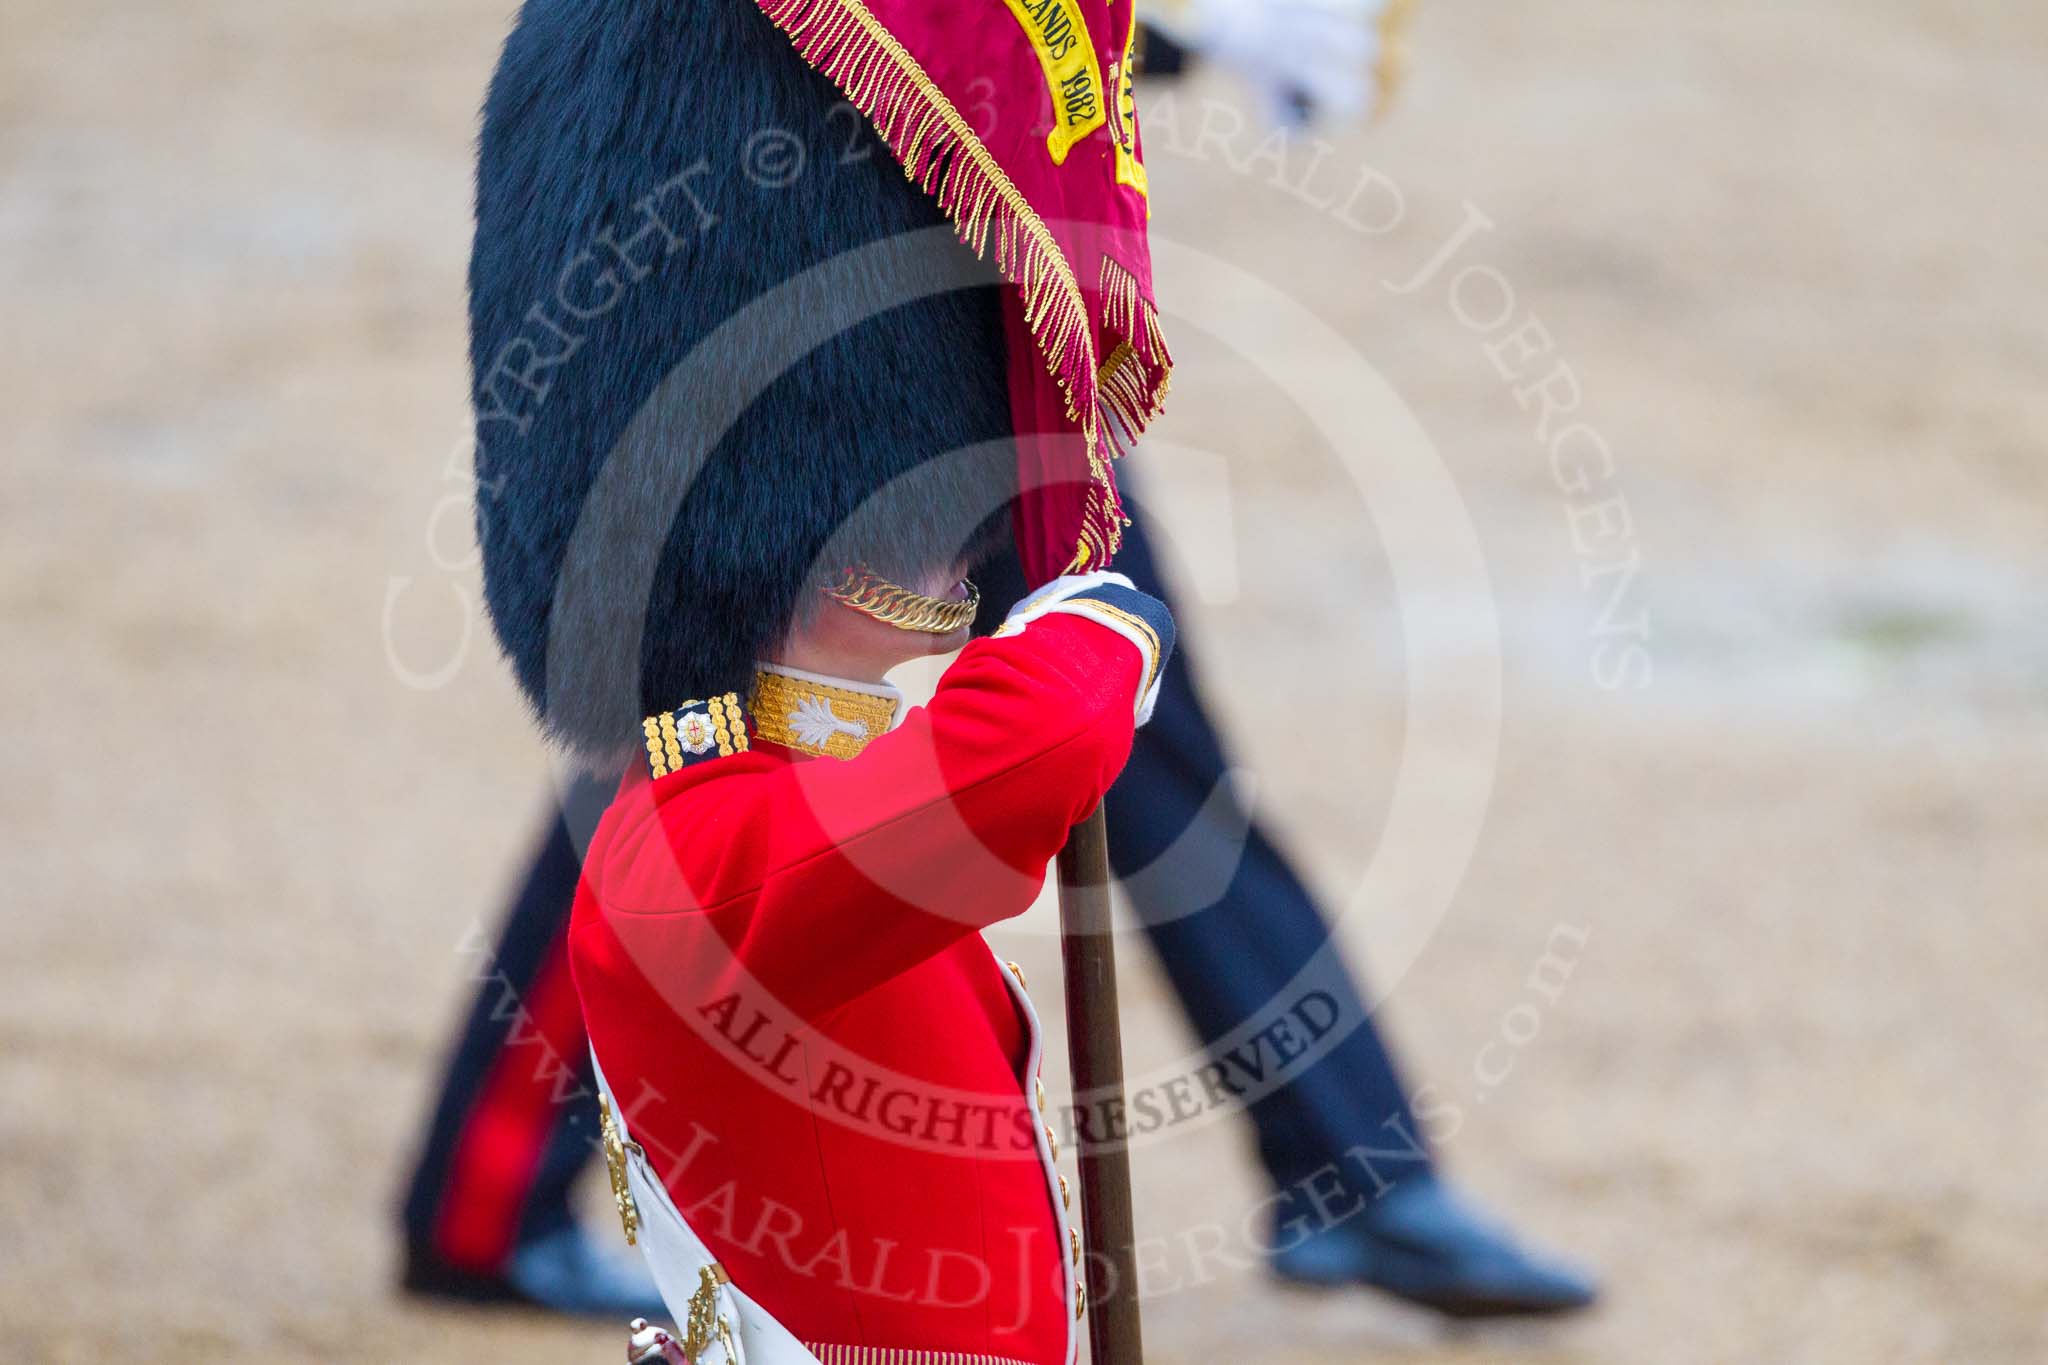 Trooping the Colour 2015. Image #455, 13 June 2015 11:35 Horse Guards Parade, London, UK